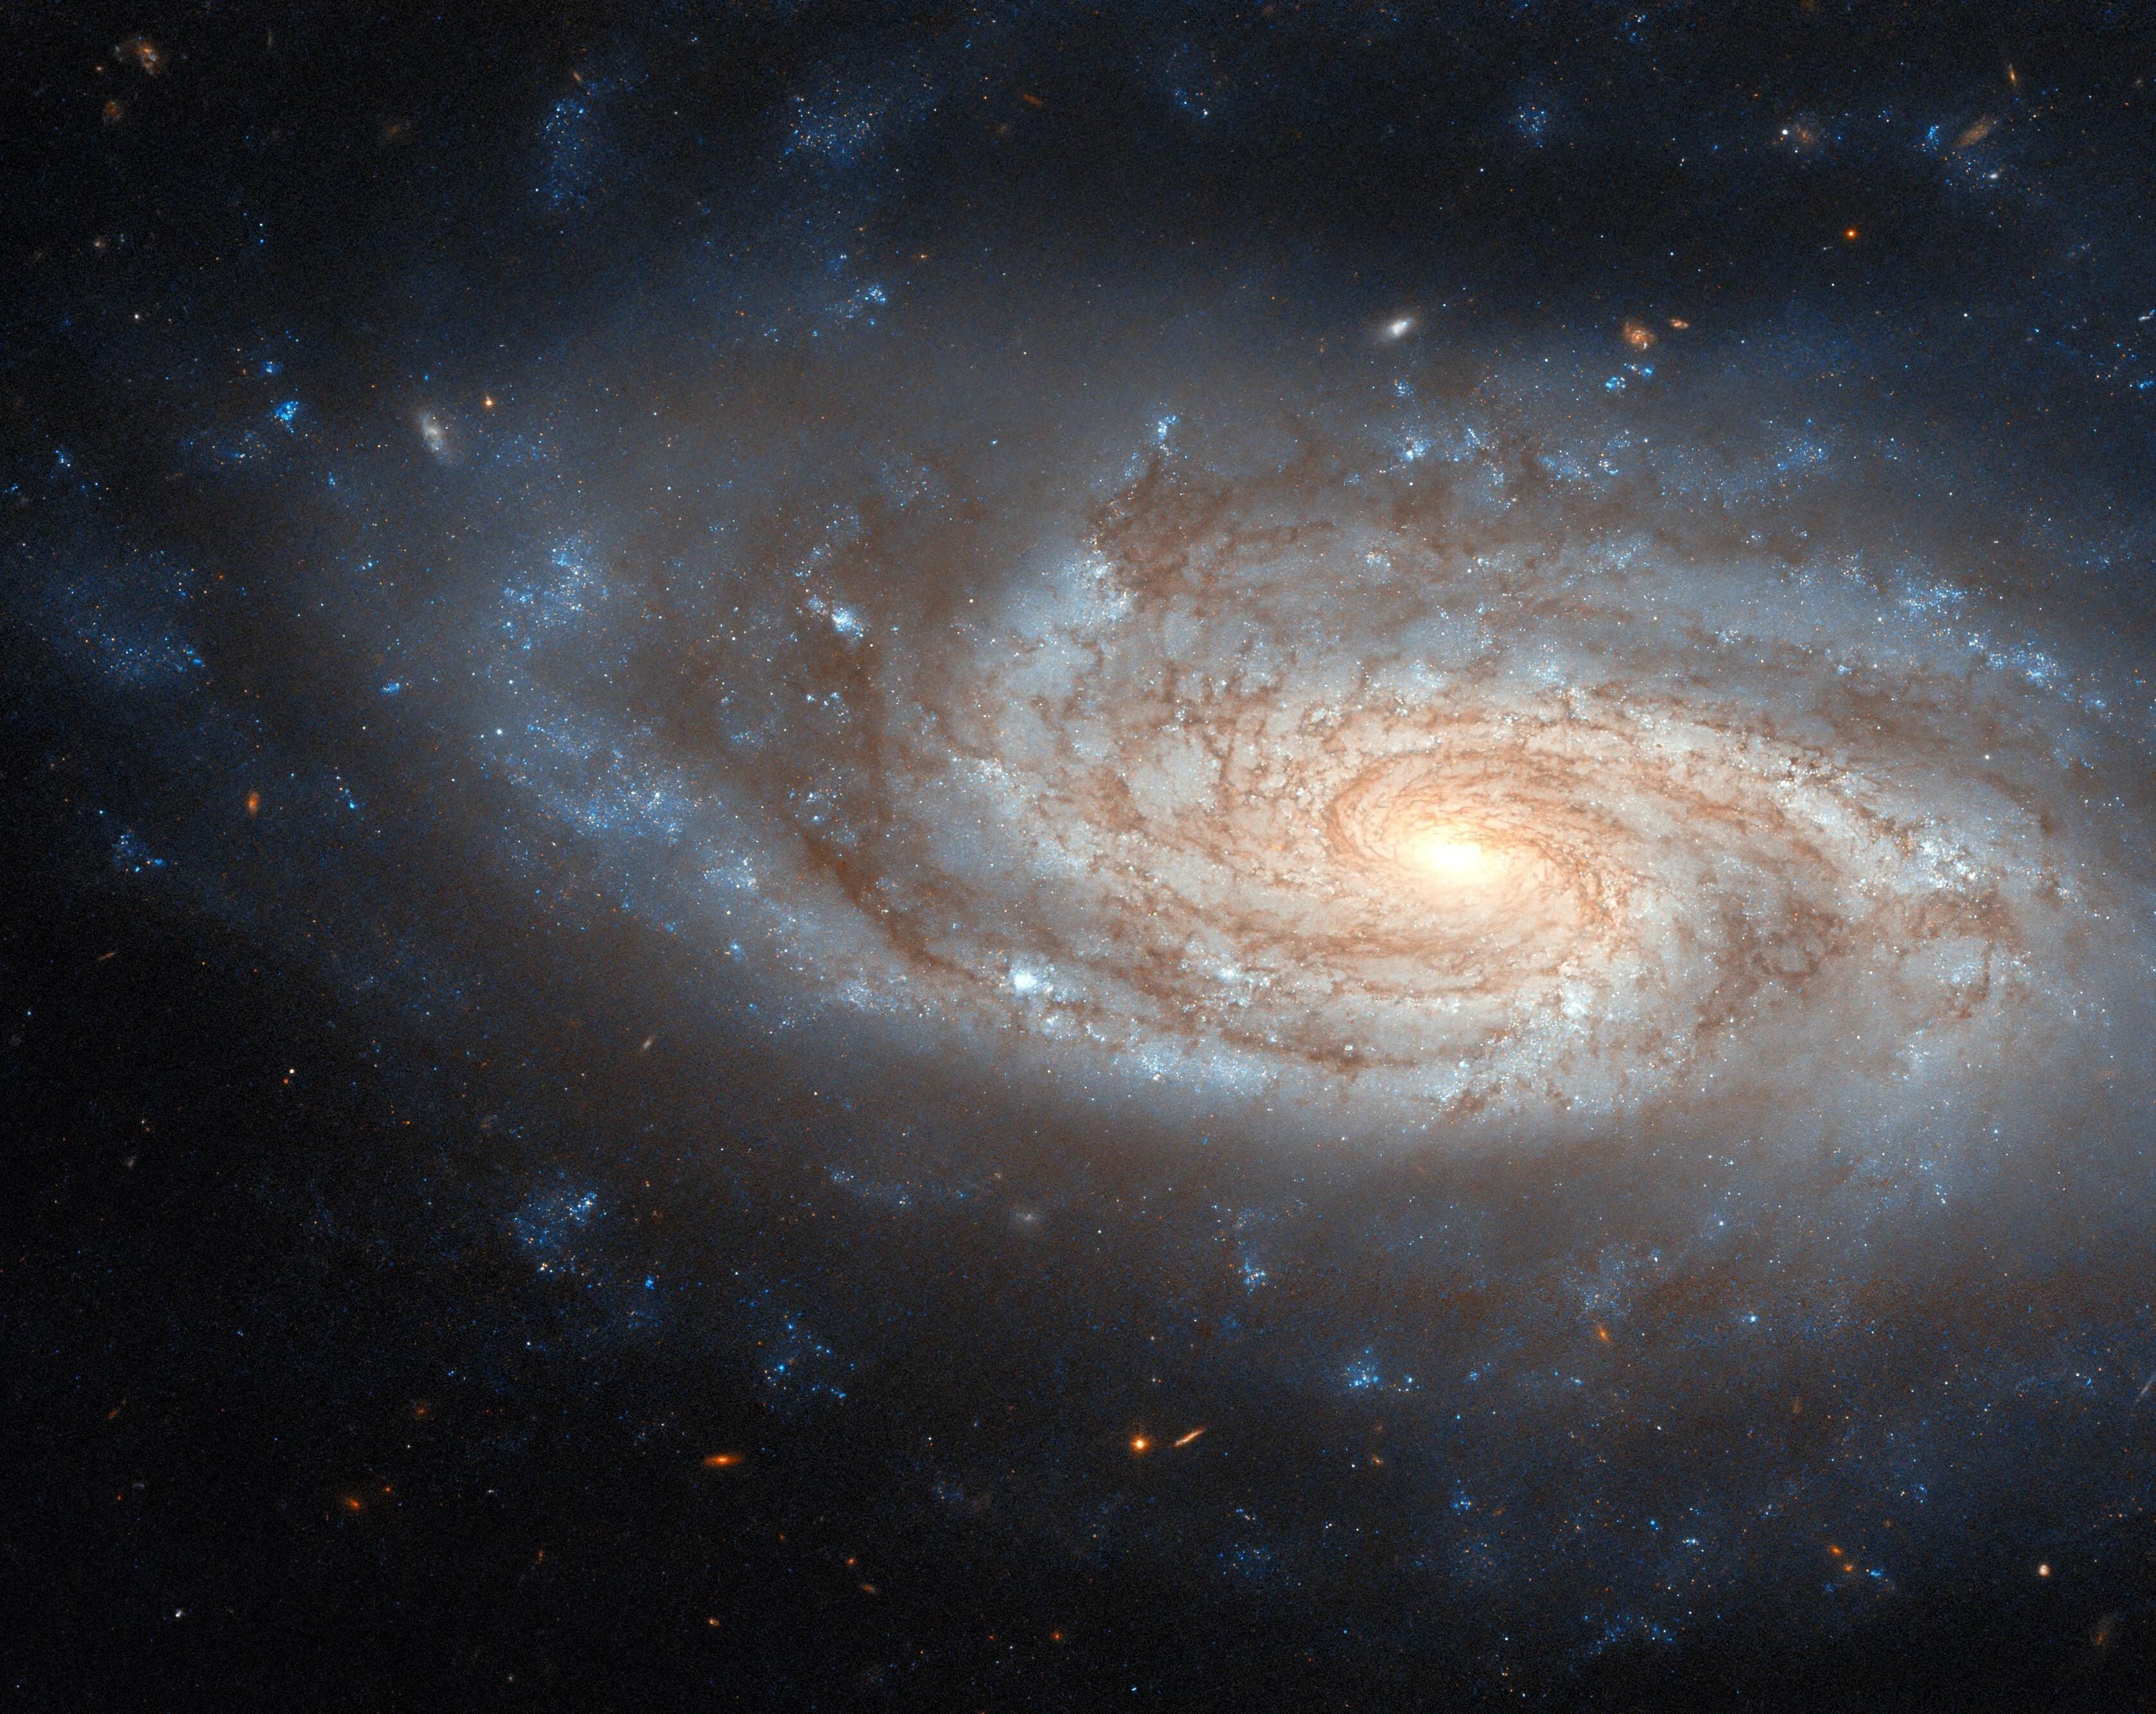 A spiral galaxy with three prominent arms wrapping around it. The galaxy holds plenty of extra gas and dark dust between the arms. There are shining blue points throughout the arms and some patches of gas out beyond the galaxy’s edge, where stars are forming. The center of the galaxy also shines brightly. It is on a dark background where some small orange dots mark distant galaxies.